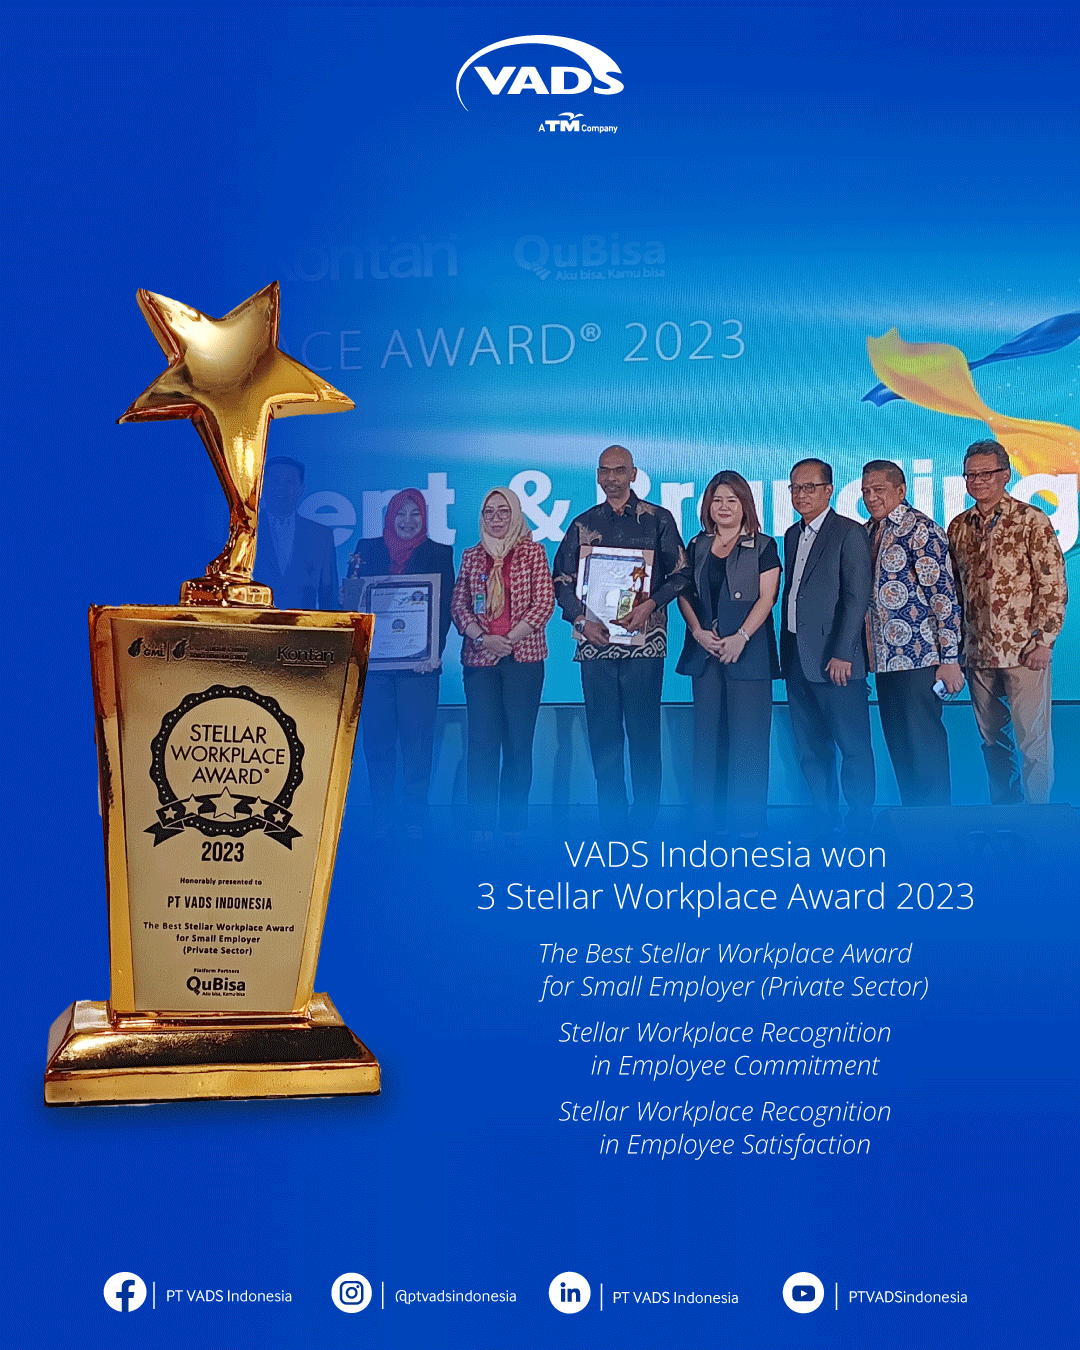 Image of PT VADS Indonesia: Wins the 2023 Stellar Workplace Award